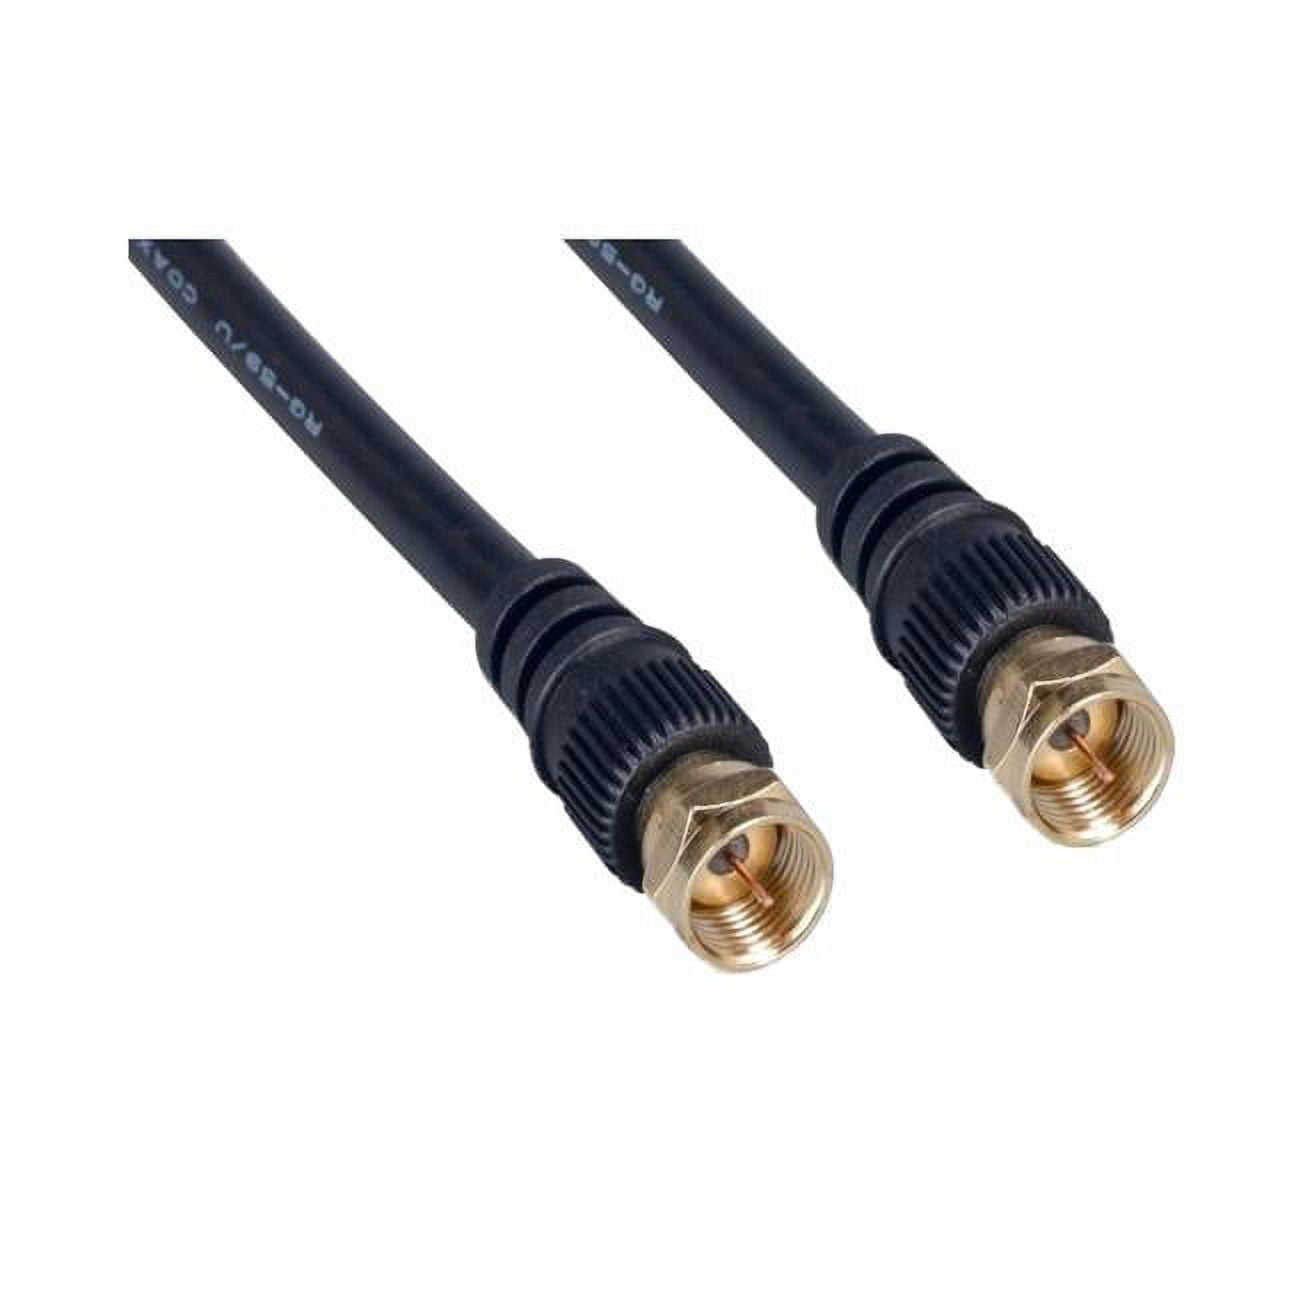 Picture of Cable Wholesale 10X2-01150G 50 ft. F-Pin Male RG59 Coaxial Cable with Gold Connectors, Black